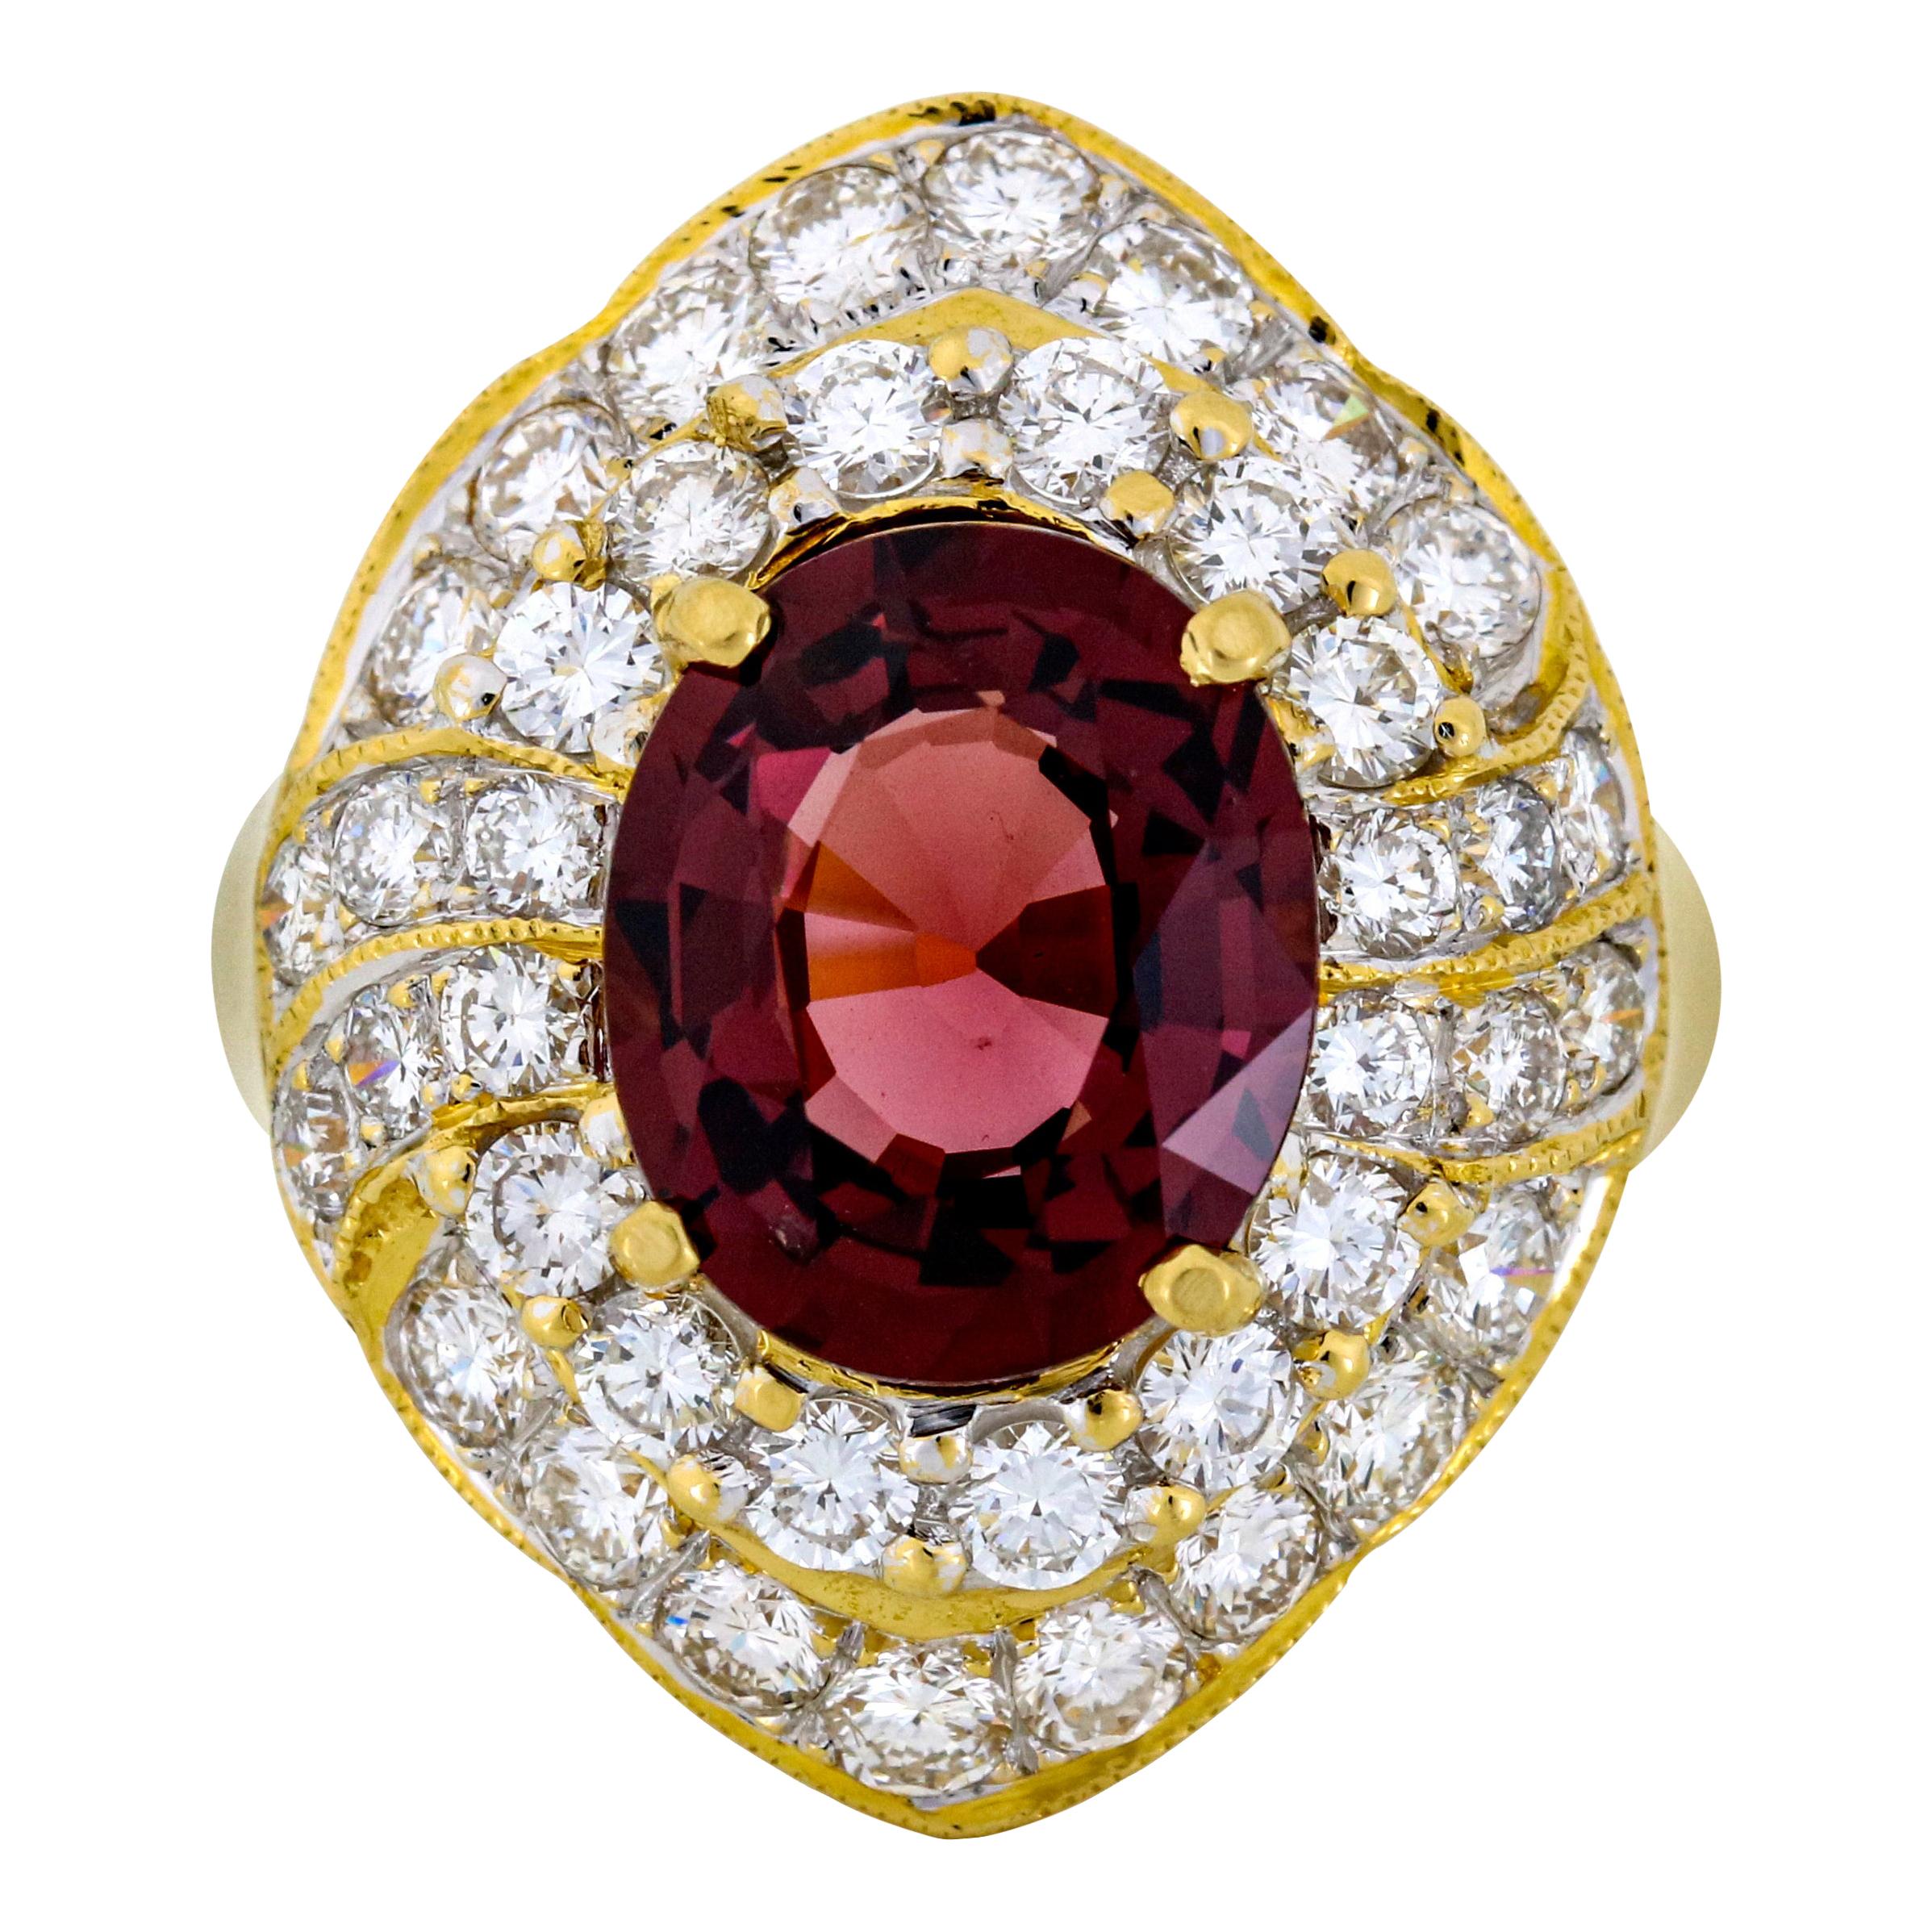 GIA 3.25 Carat Red Spinel Diamond Cocktail Ring in 18 Karat Yellow Gold For Sale